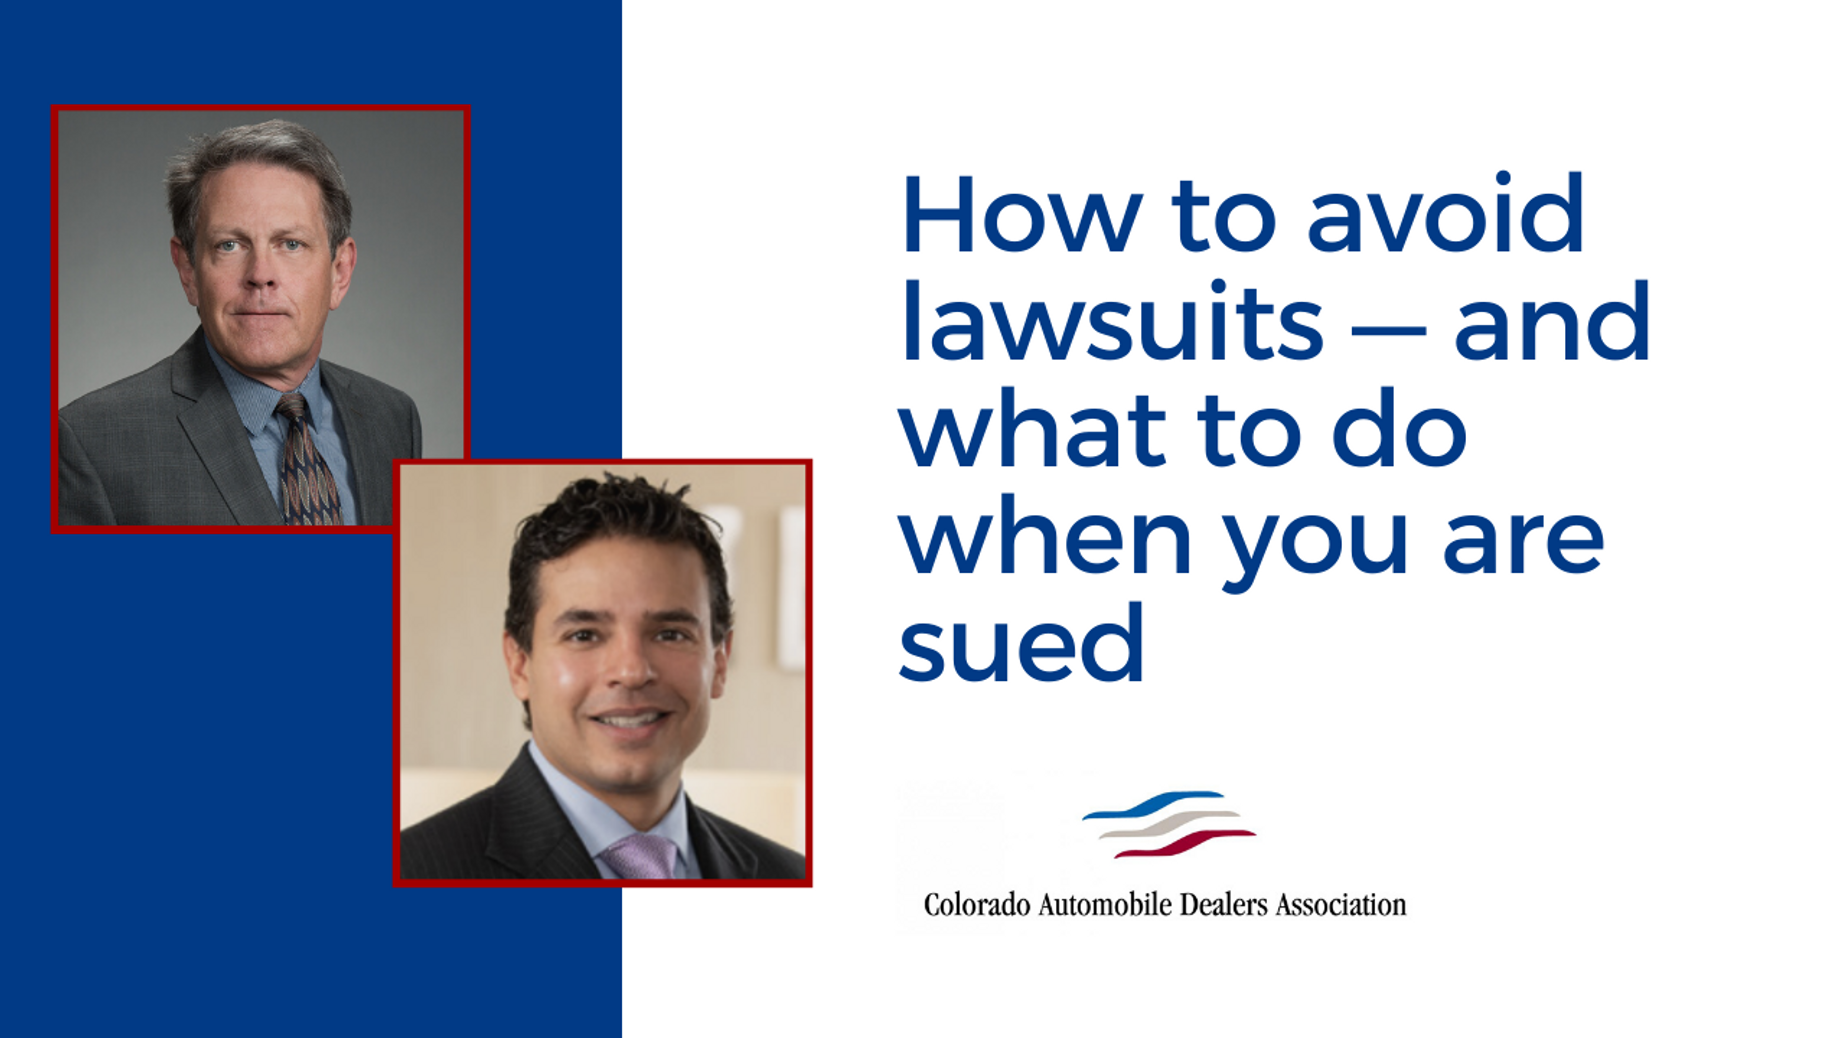 How to avoid lawsuits — and what to do when you are sued